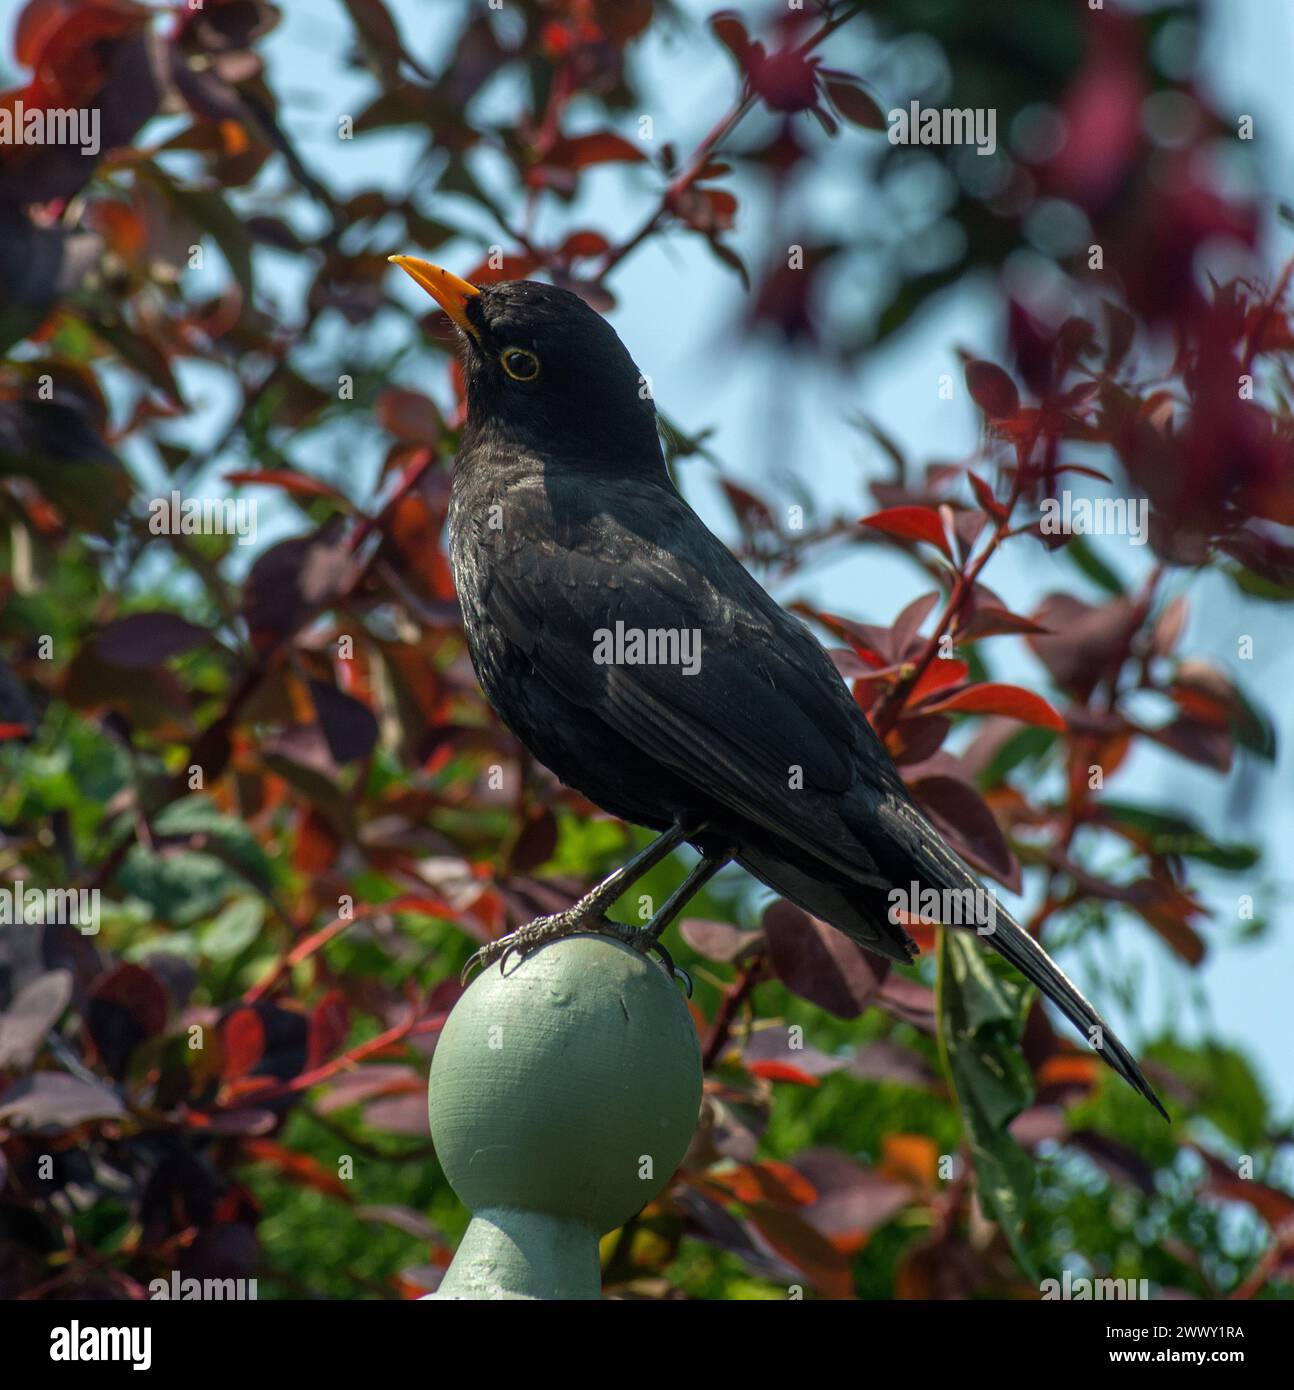 Blackbird relaxed and perched on top of garden obelisk facing left and with head slightly turned to the side in square image Stock Photo